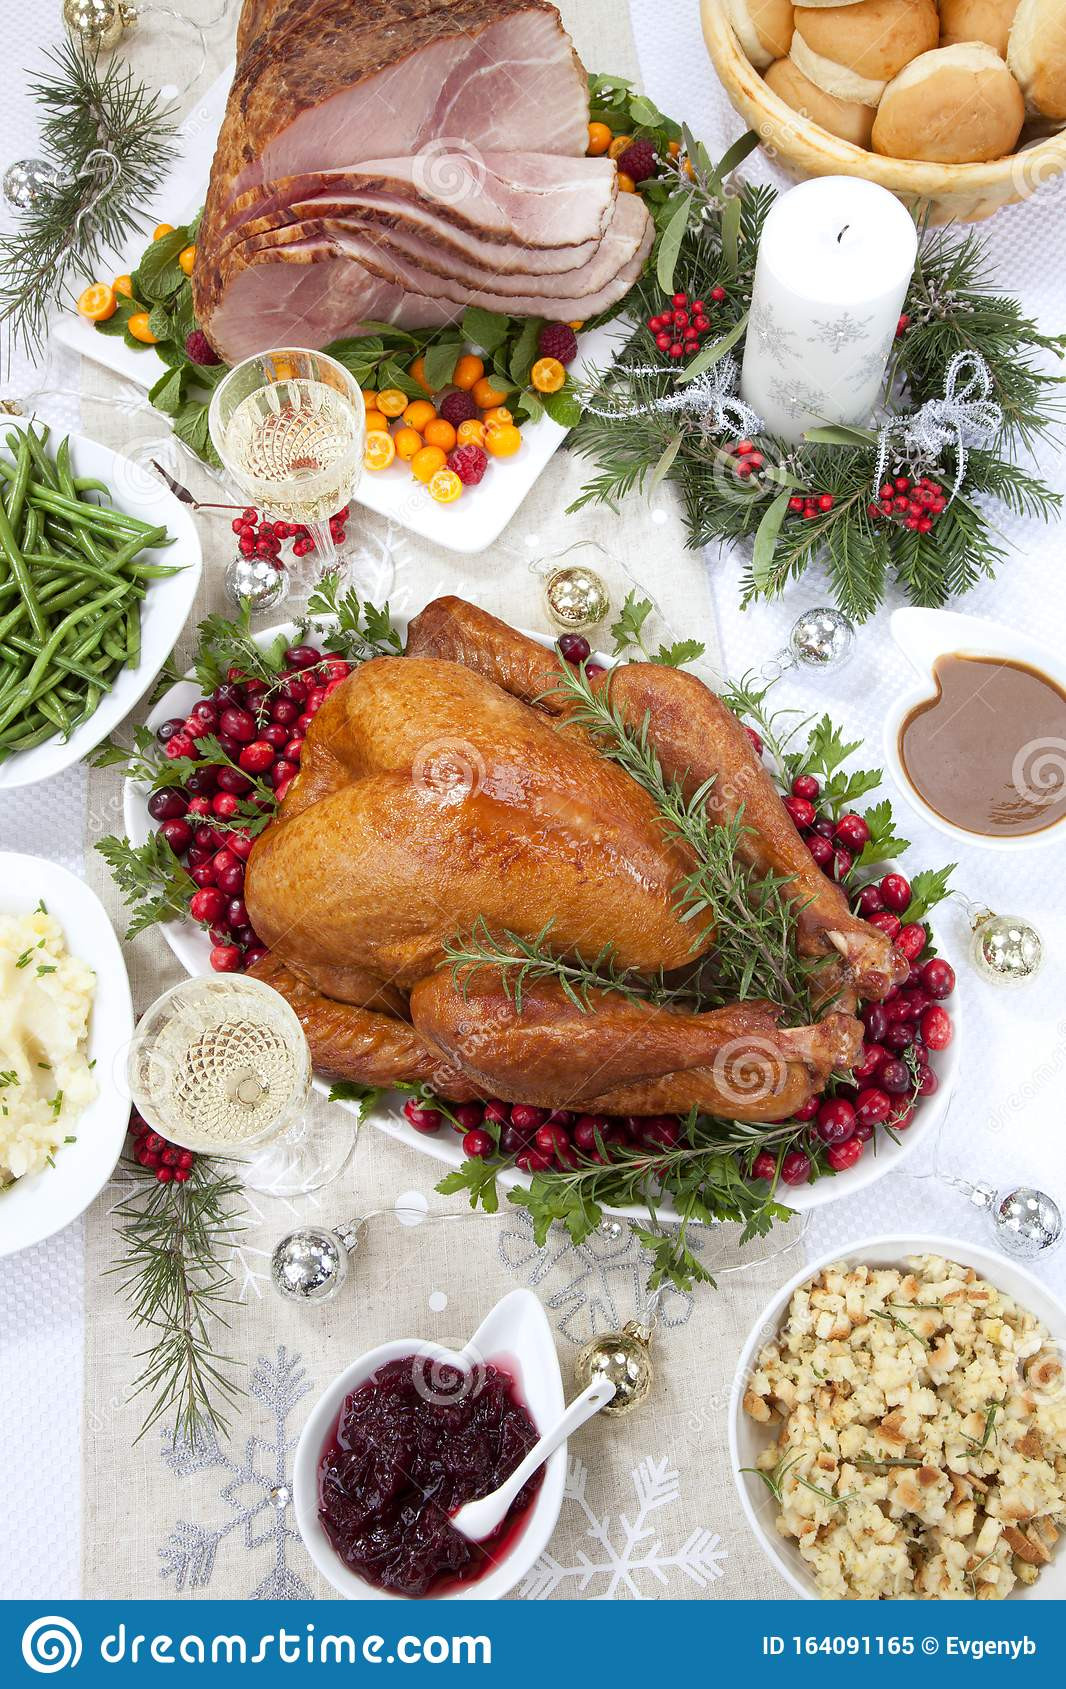 Side Dishes For Smoked Turkey
 Christmas Smoked Turkey And Ham Stock Image Image of